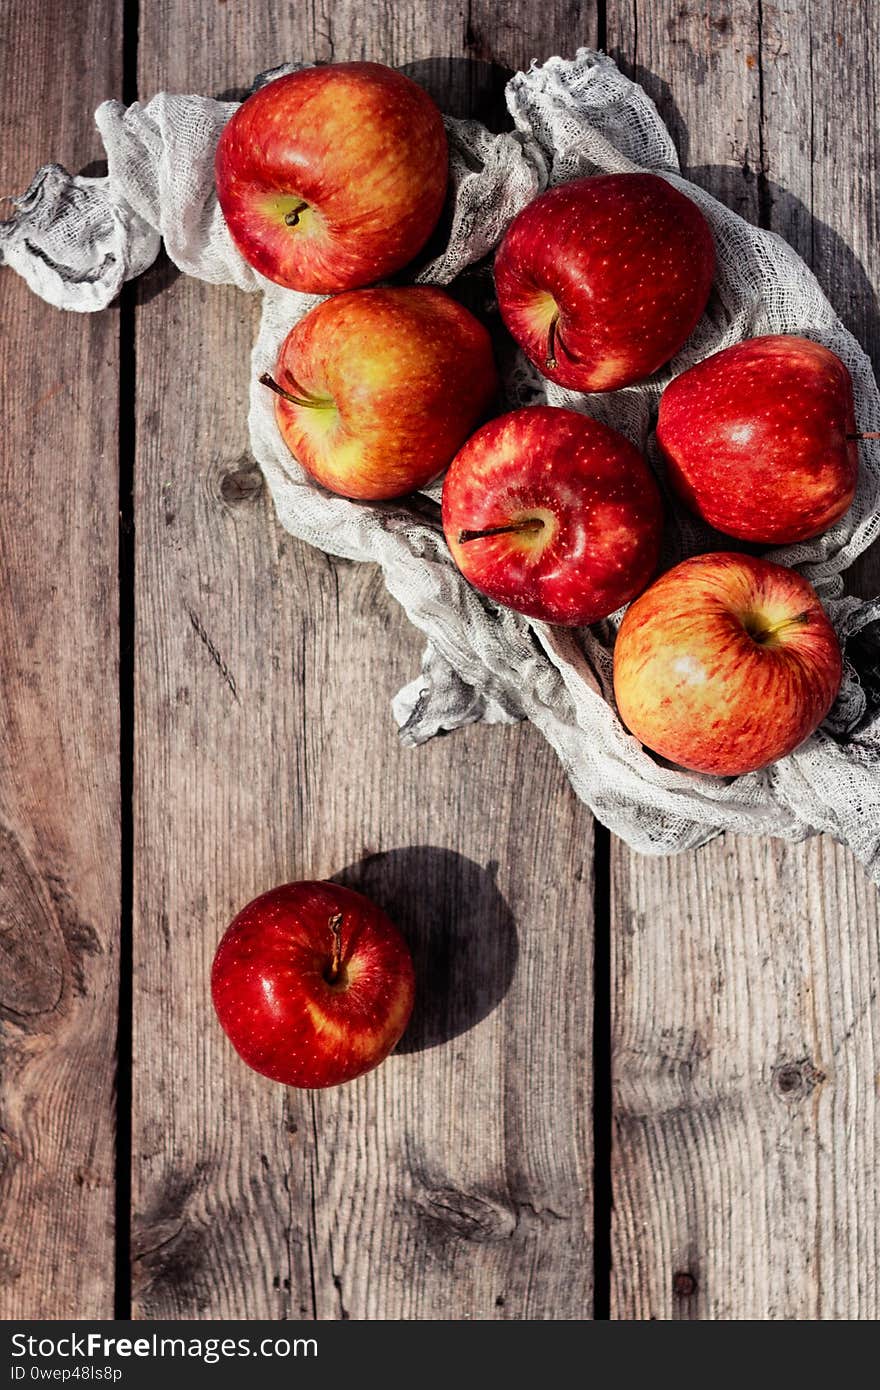 Crop of apples. Juicy summer red,orange, yellow and green apples on a wooden background. Crop of apples. Juicy summer red,orange, yellow and green apples on a wooden background